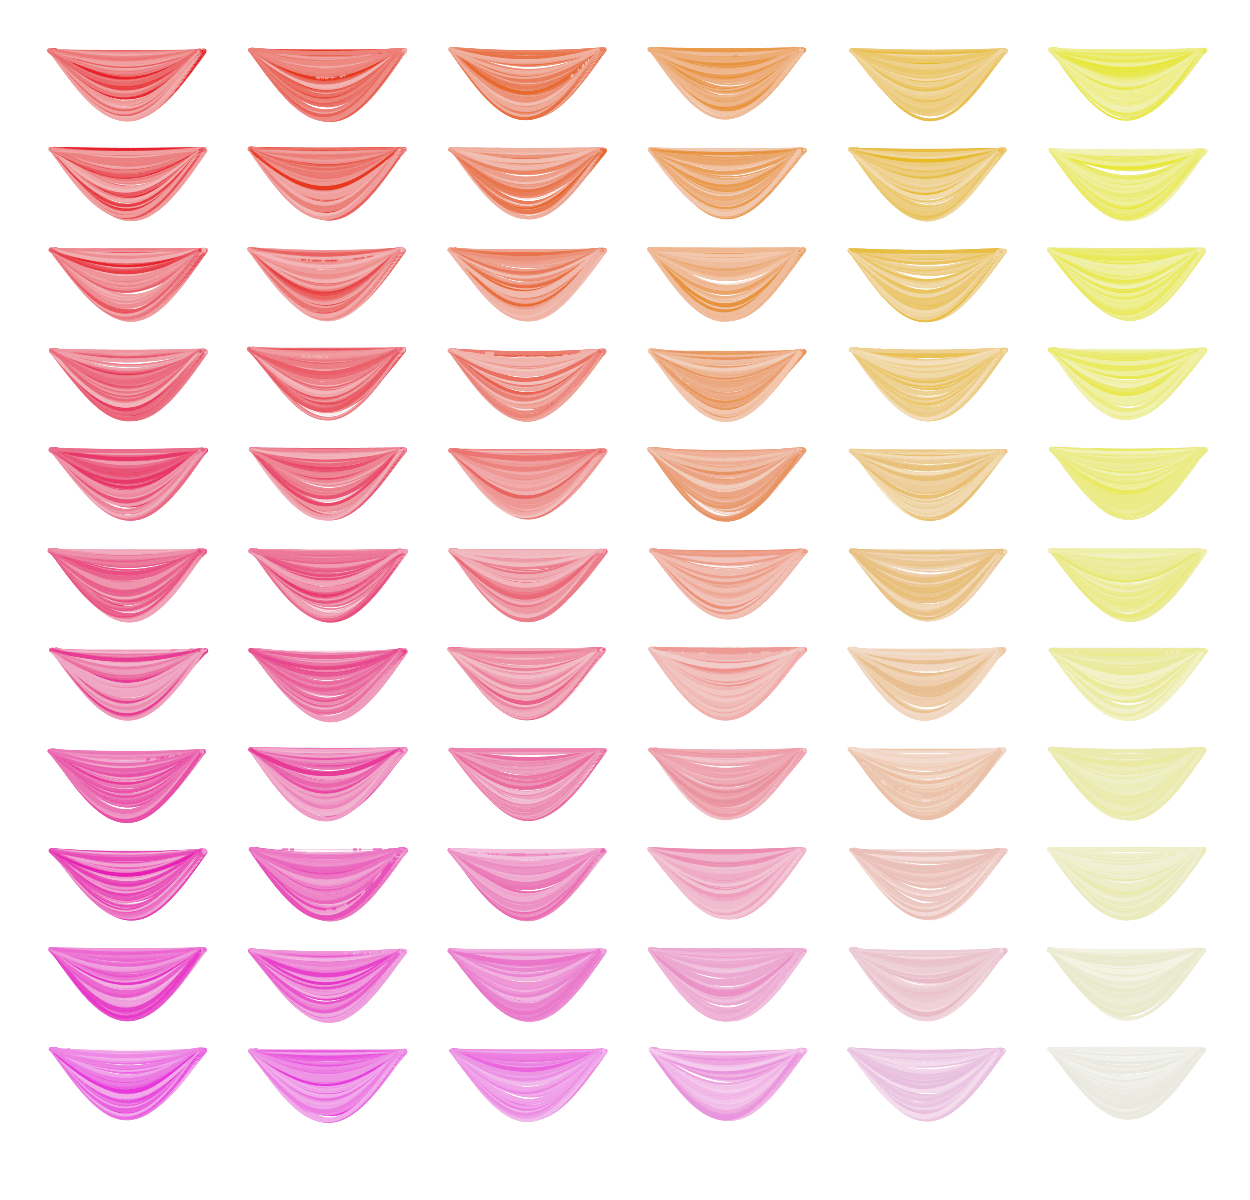 grid of crescent shaped strokes in reds, pinks, and yellows